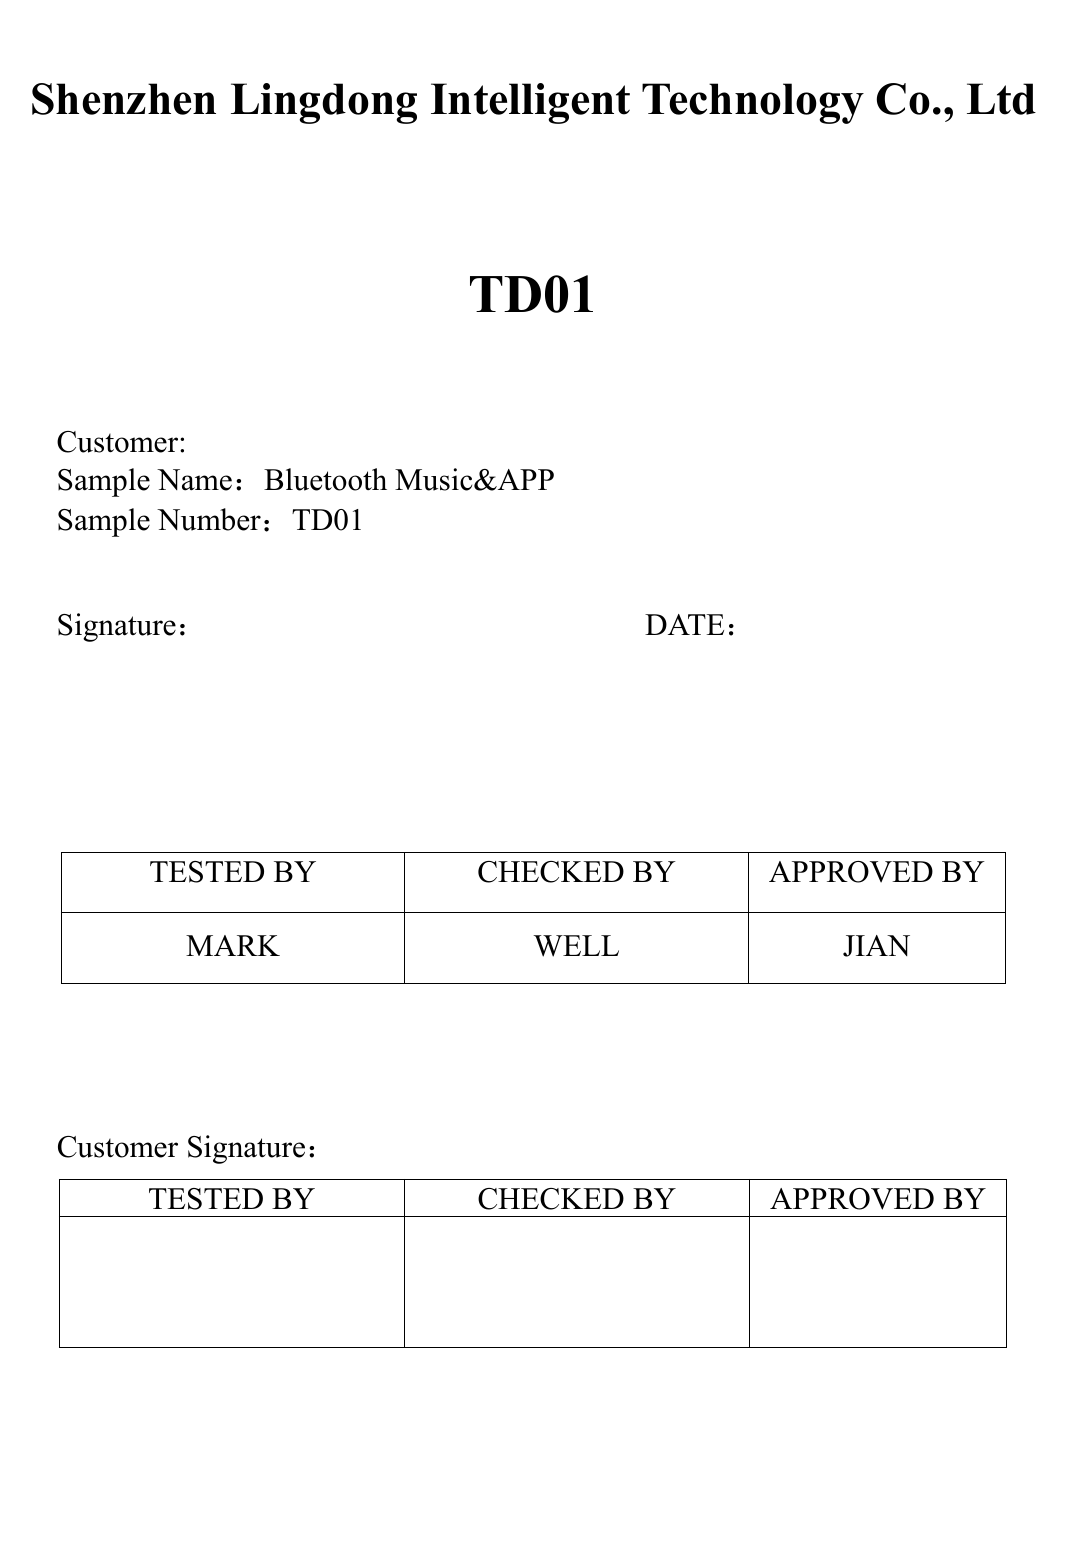 Shenzhen Lingdong Intelligent Technology Co., LtdTD01Customer:Sample Name：Bluetooth Music&amp;APPSample Number：TD01Signature：DATE：TESTED BY CHECKED BY APPROVED BYMARK WELL JIANCustomer Signature：TESTED BY CHECKED BY APPROVED BY